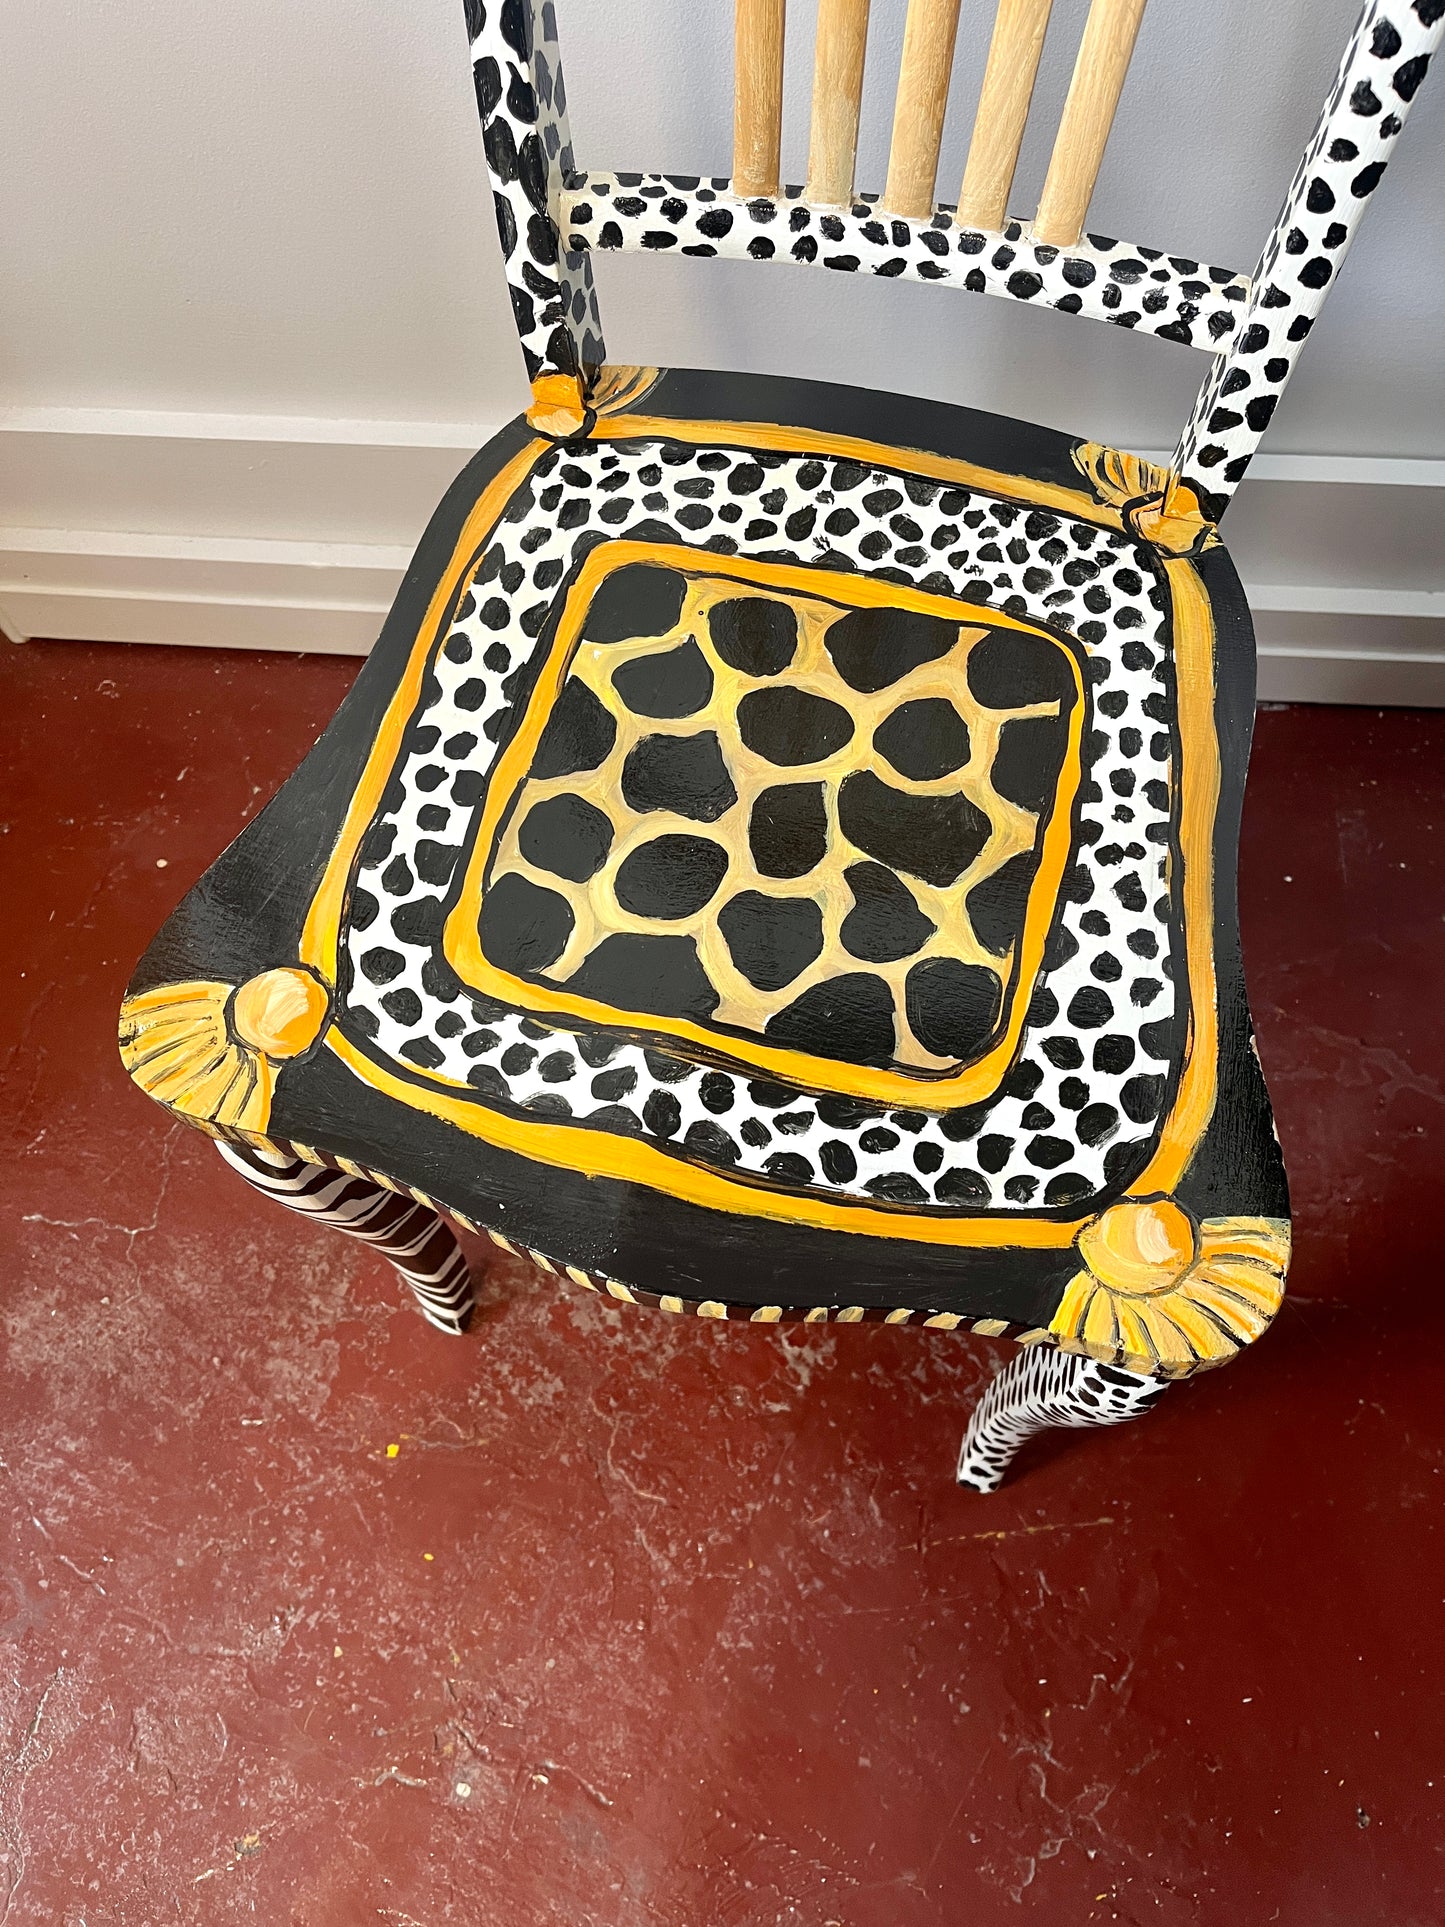 Artist-signed Handpainted Animal Print Wooden Chair